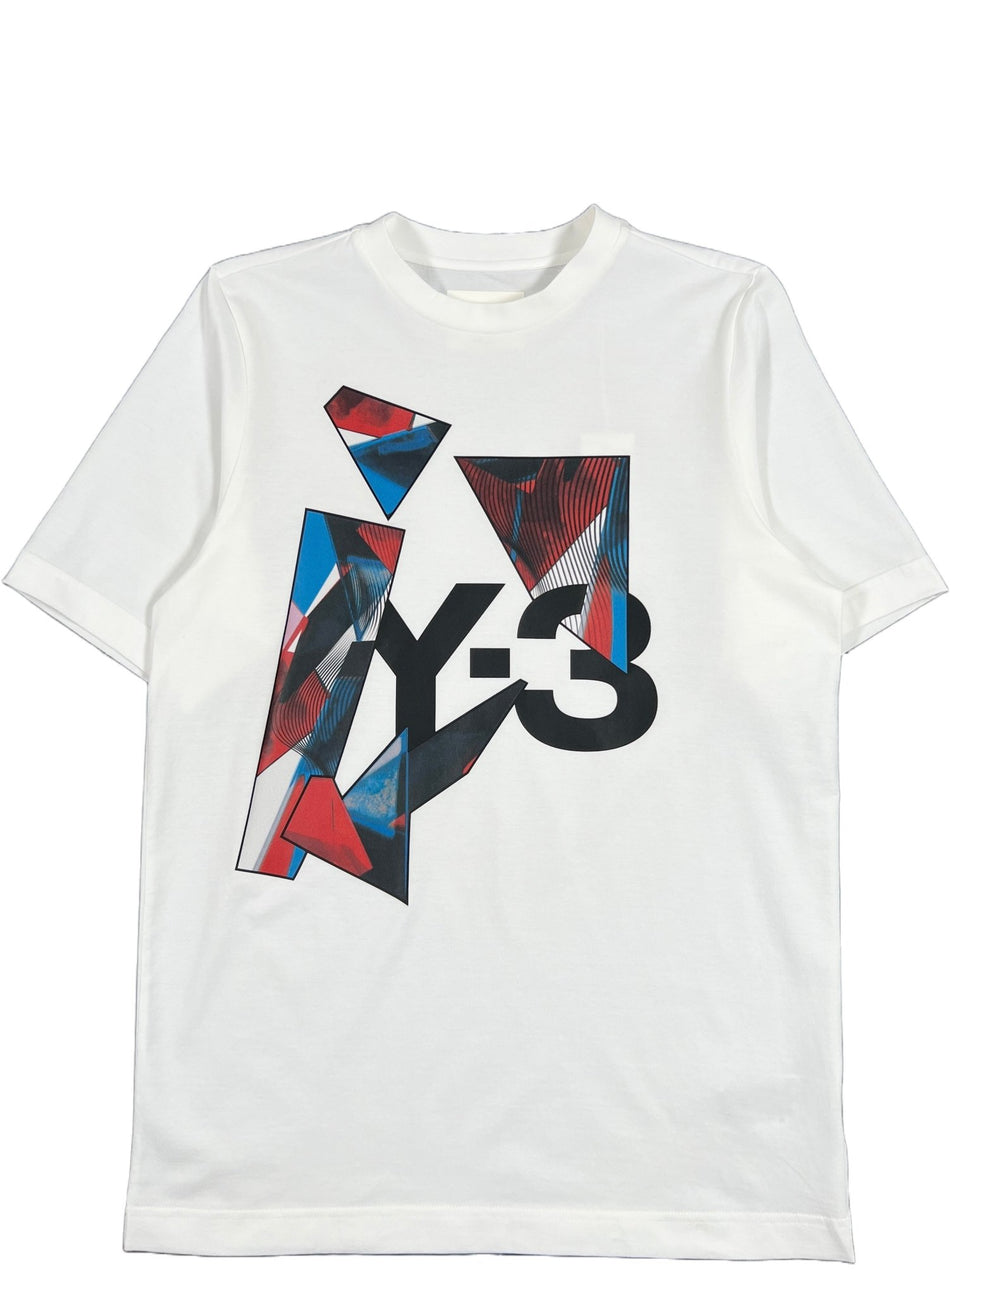 A white ADIDAS x Y-3 graphic t-shirt with the word Y-3 on it.